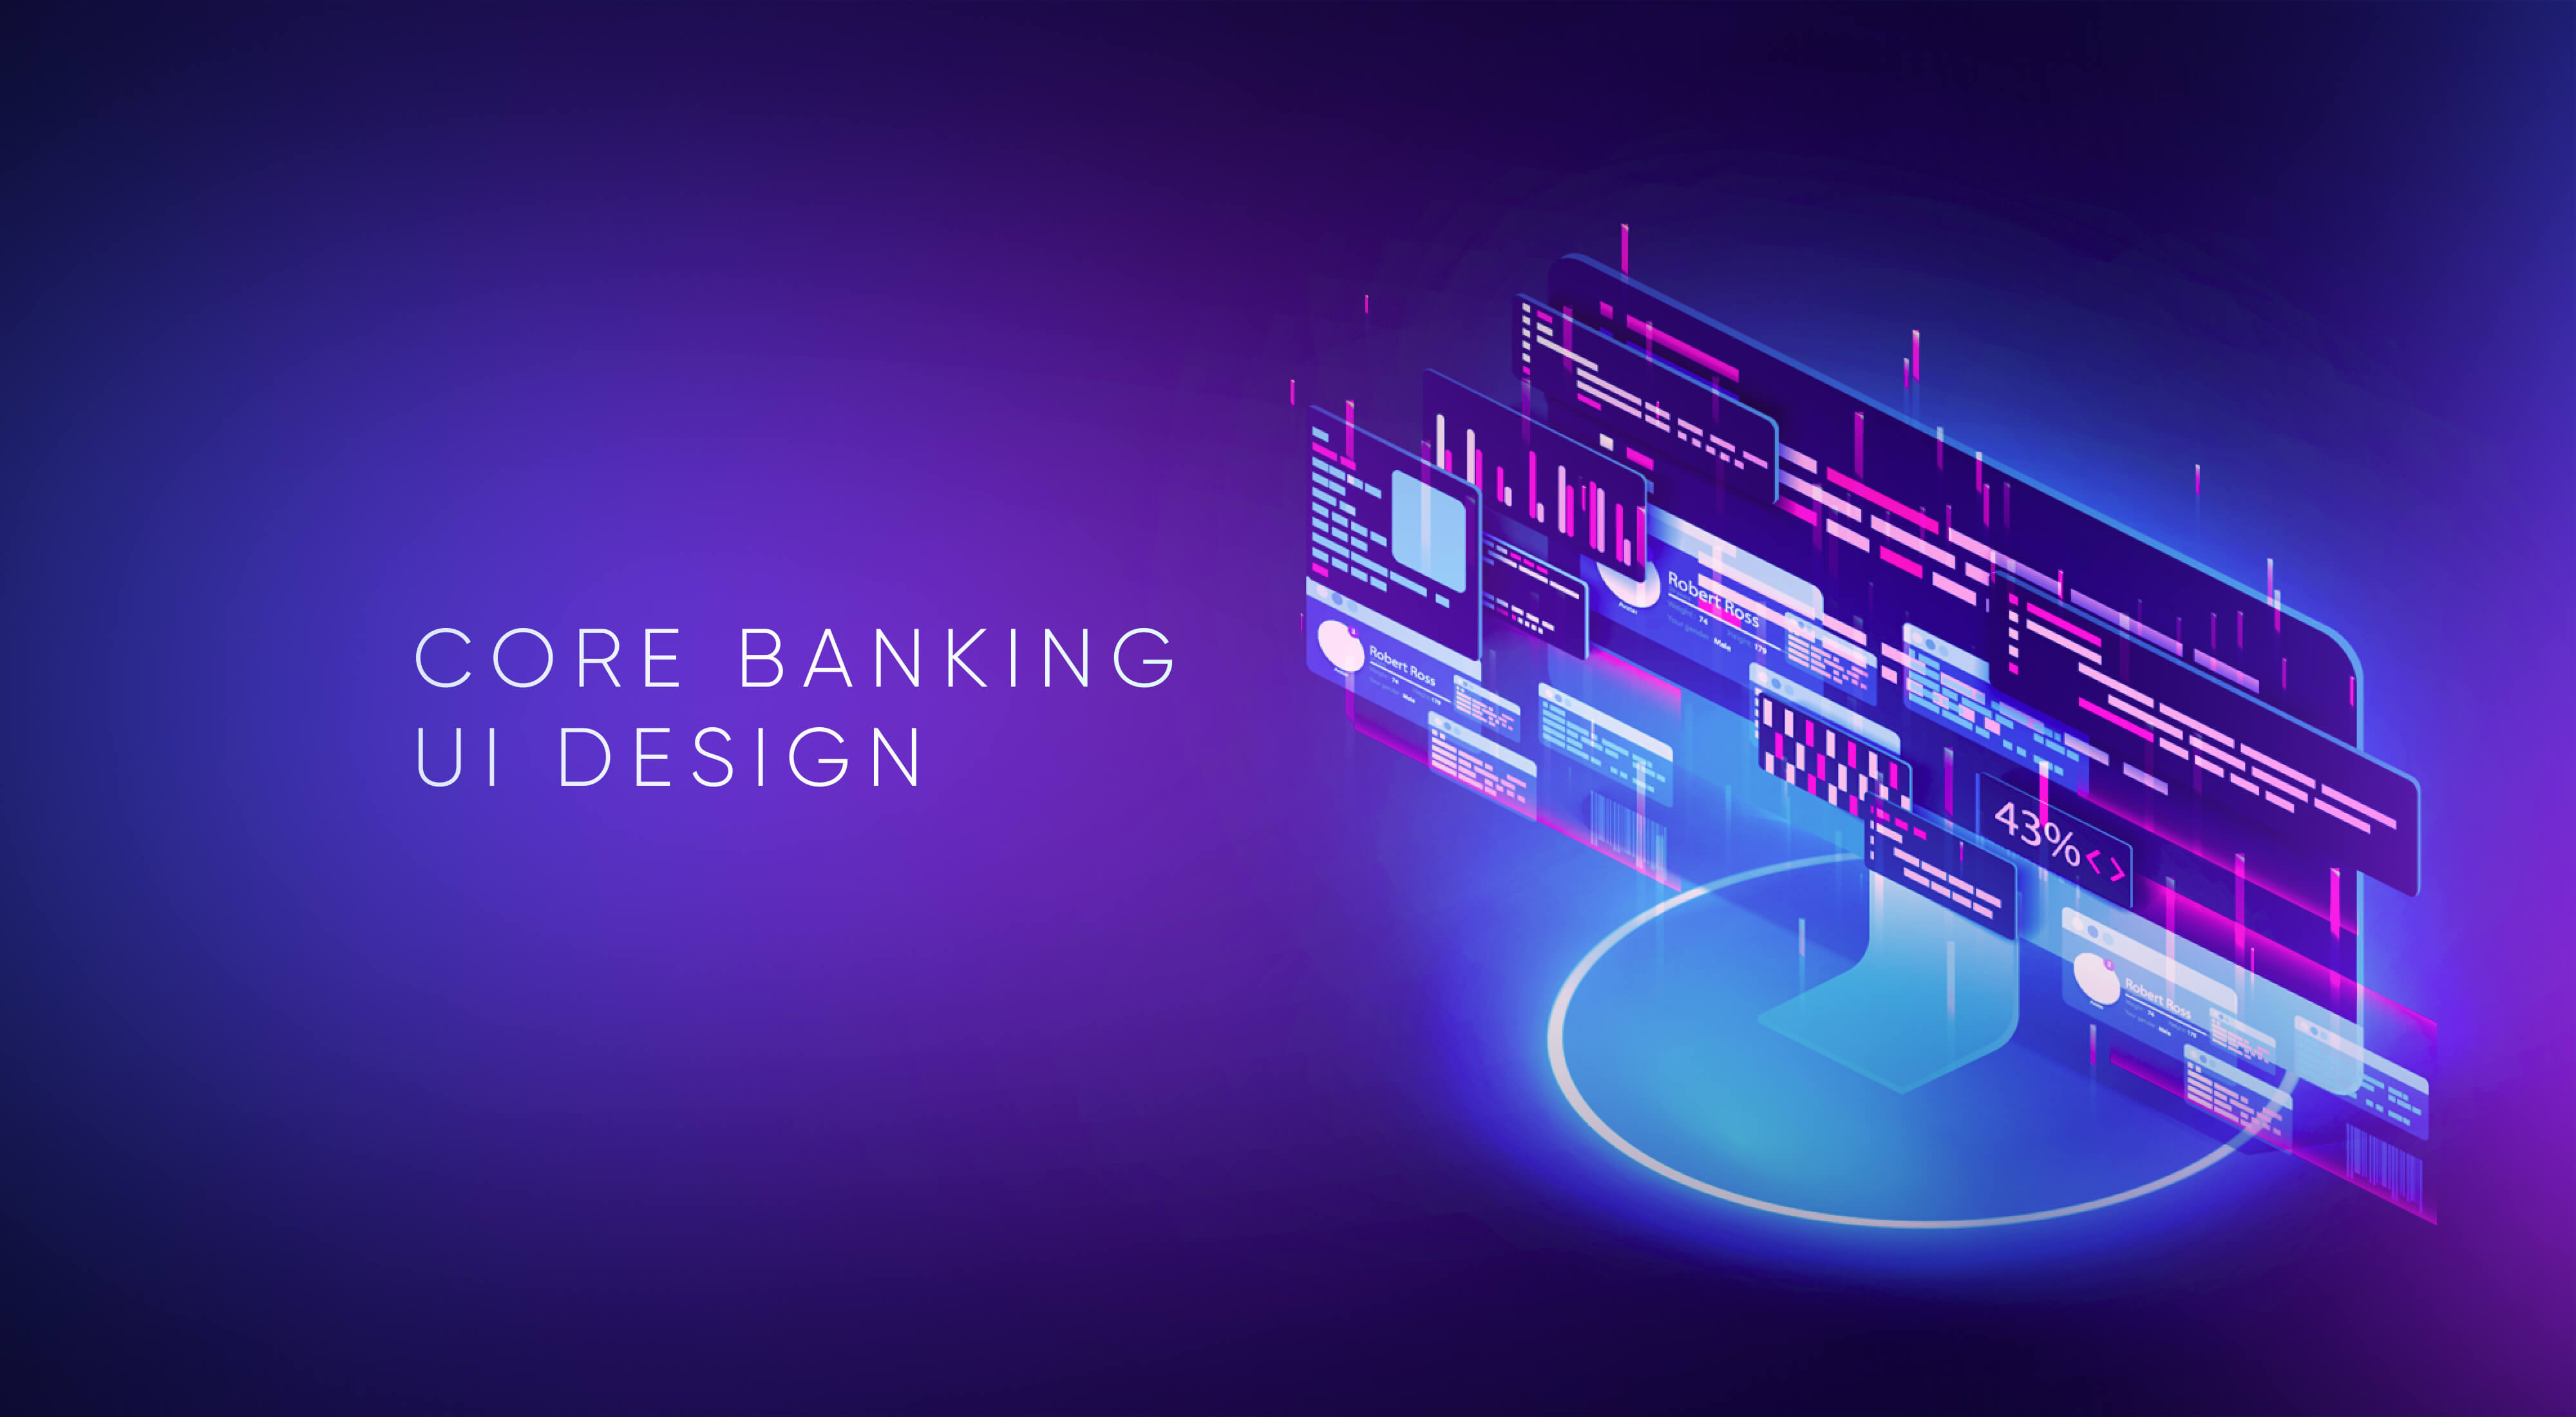 Core Banking UI Design That Will Change The Perception Of Service Design